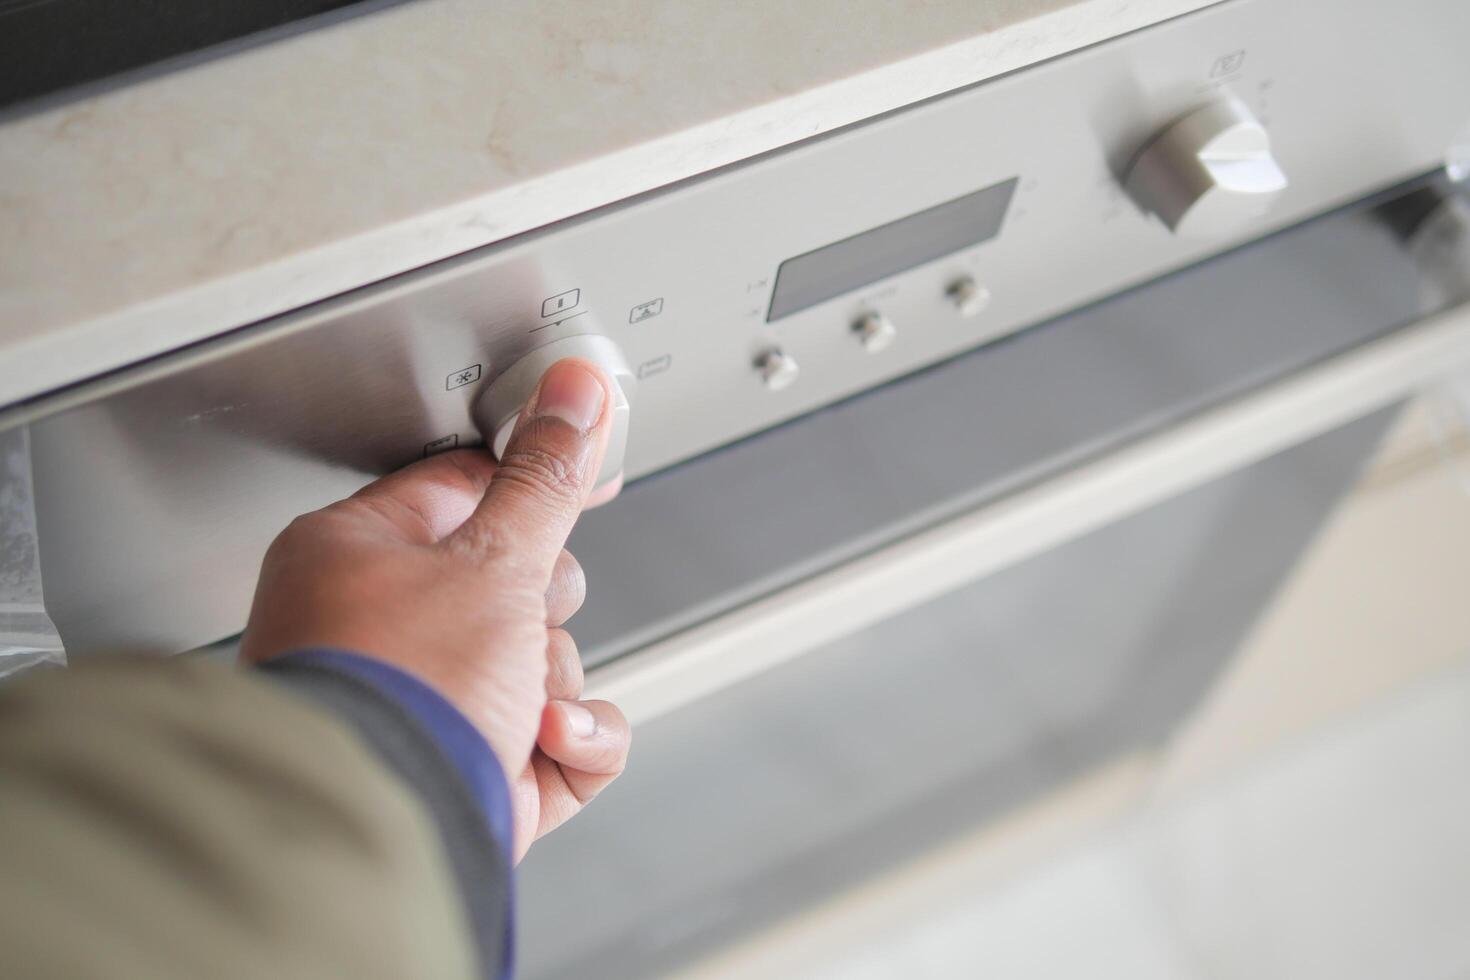 man hand setting temperature control on oven. photo